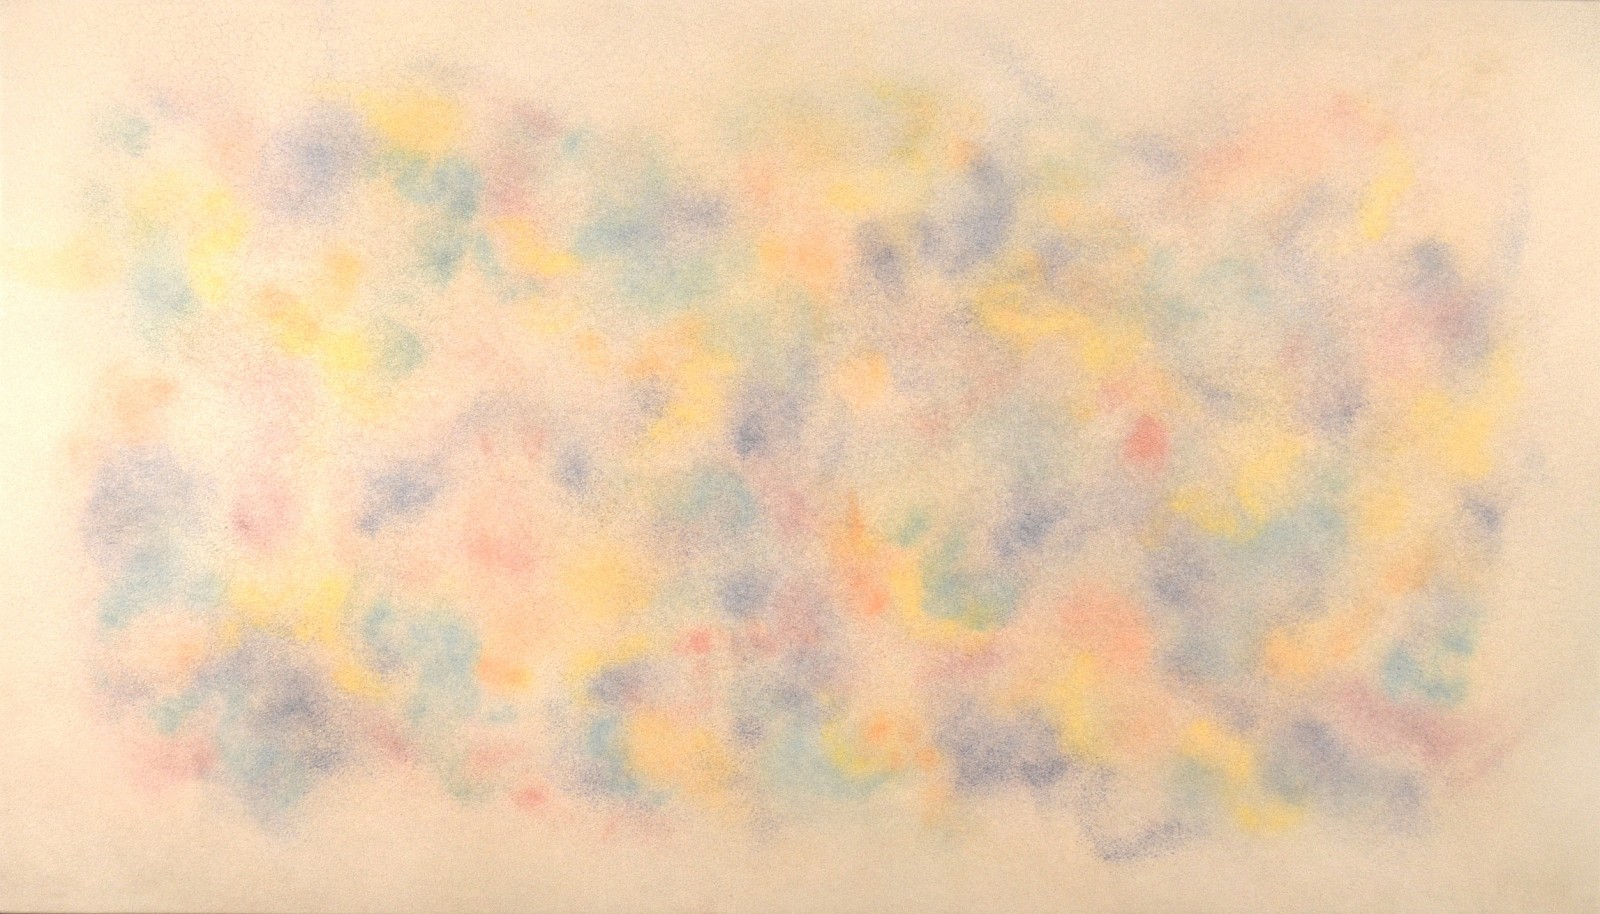 Natvar Bhavsar, MOHINEE, 2013
Dry pigment and acrylic on Canvas, 54 x 90 inches
14